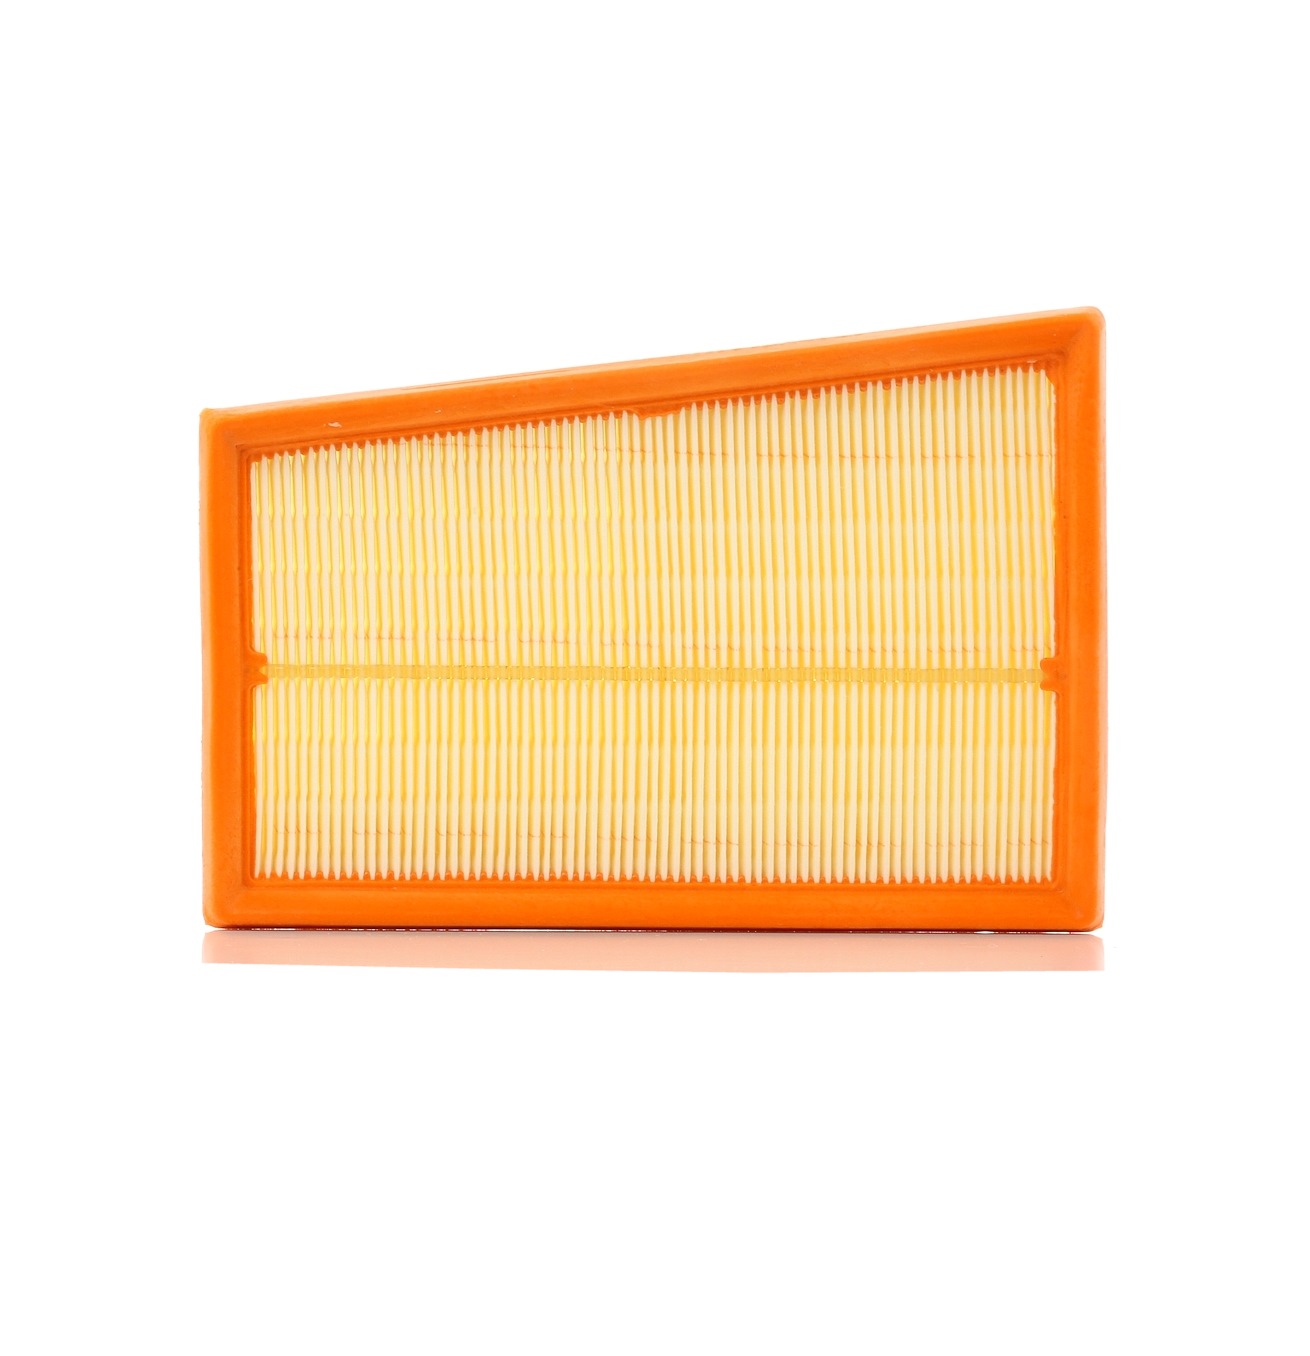 Renault LODGY Engine filter 7851217 PURFLUX A1317 online buy